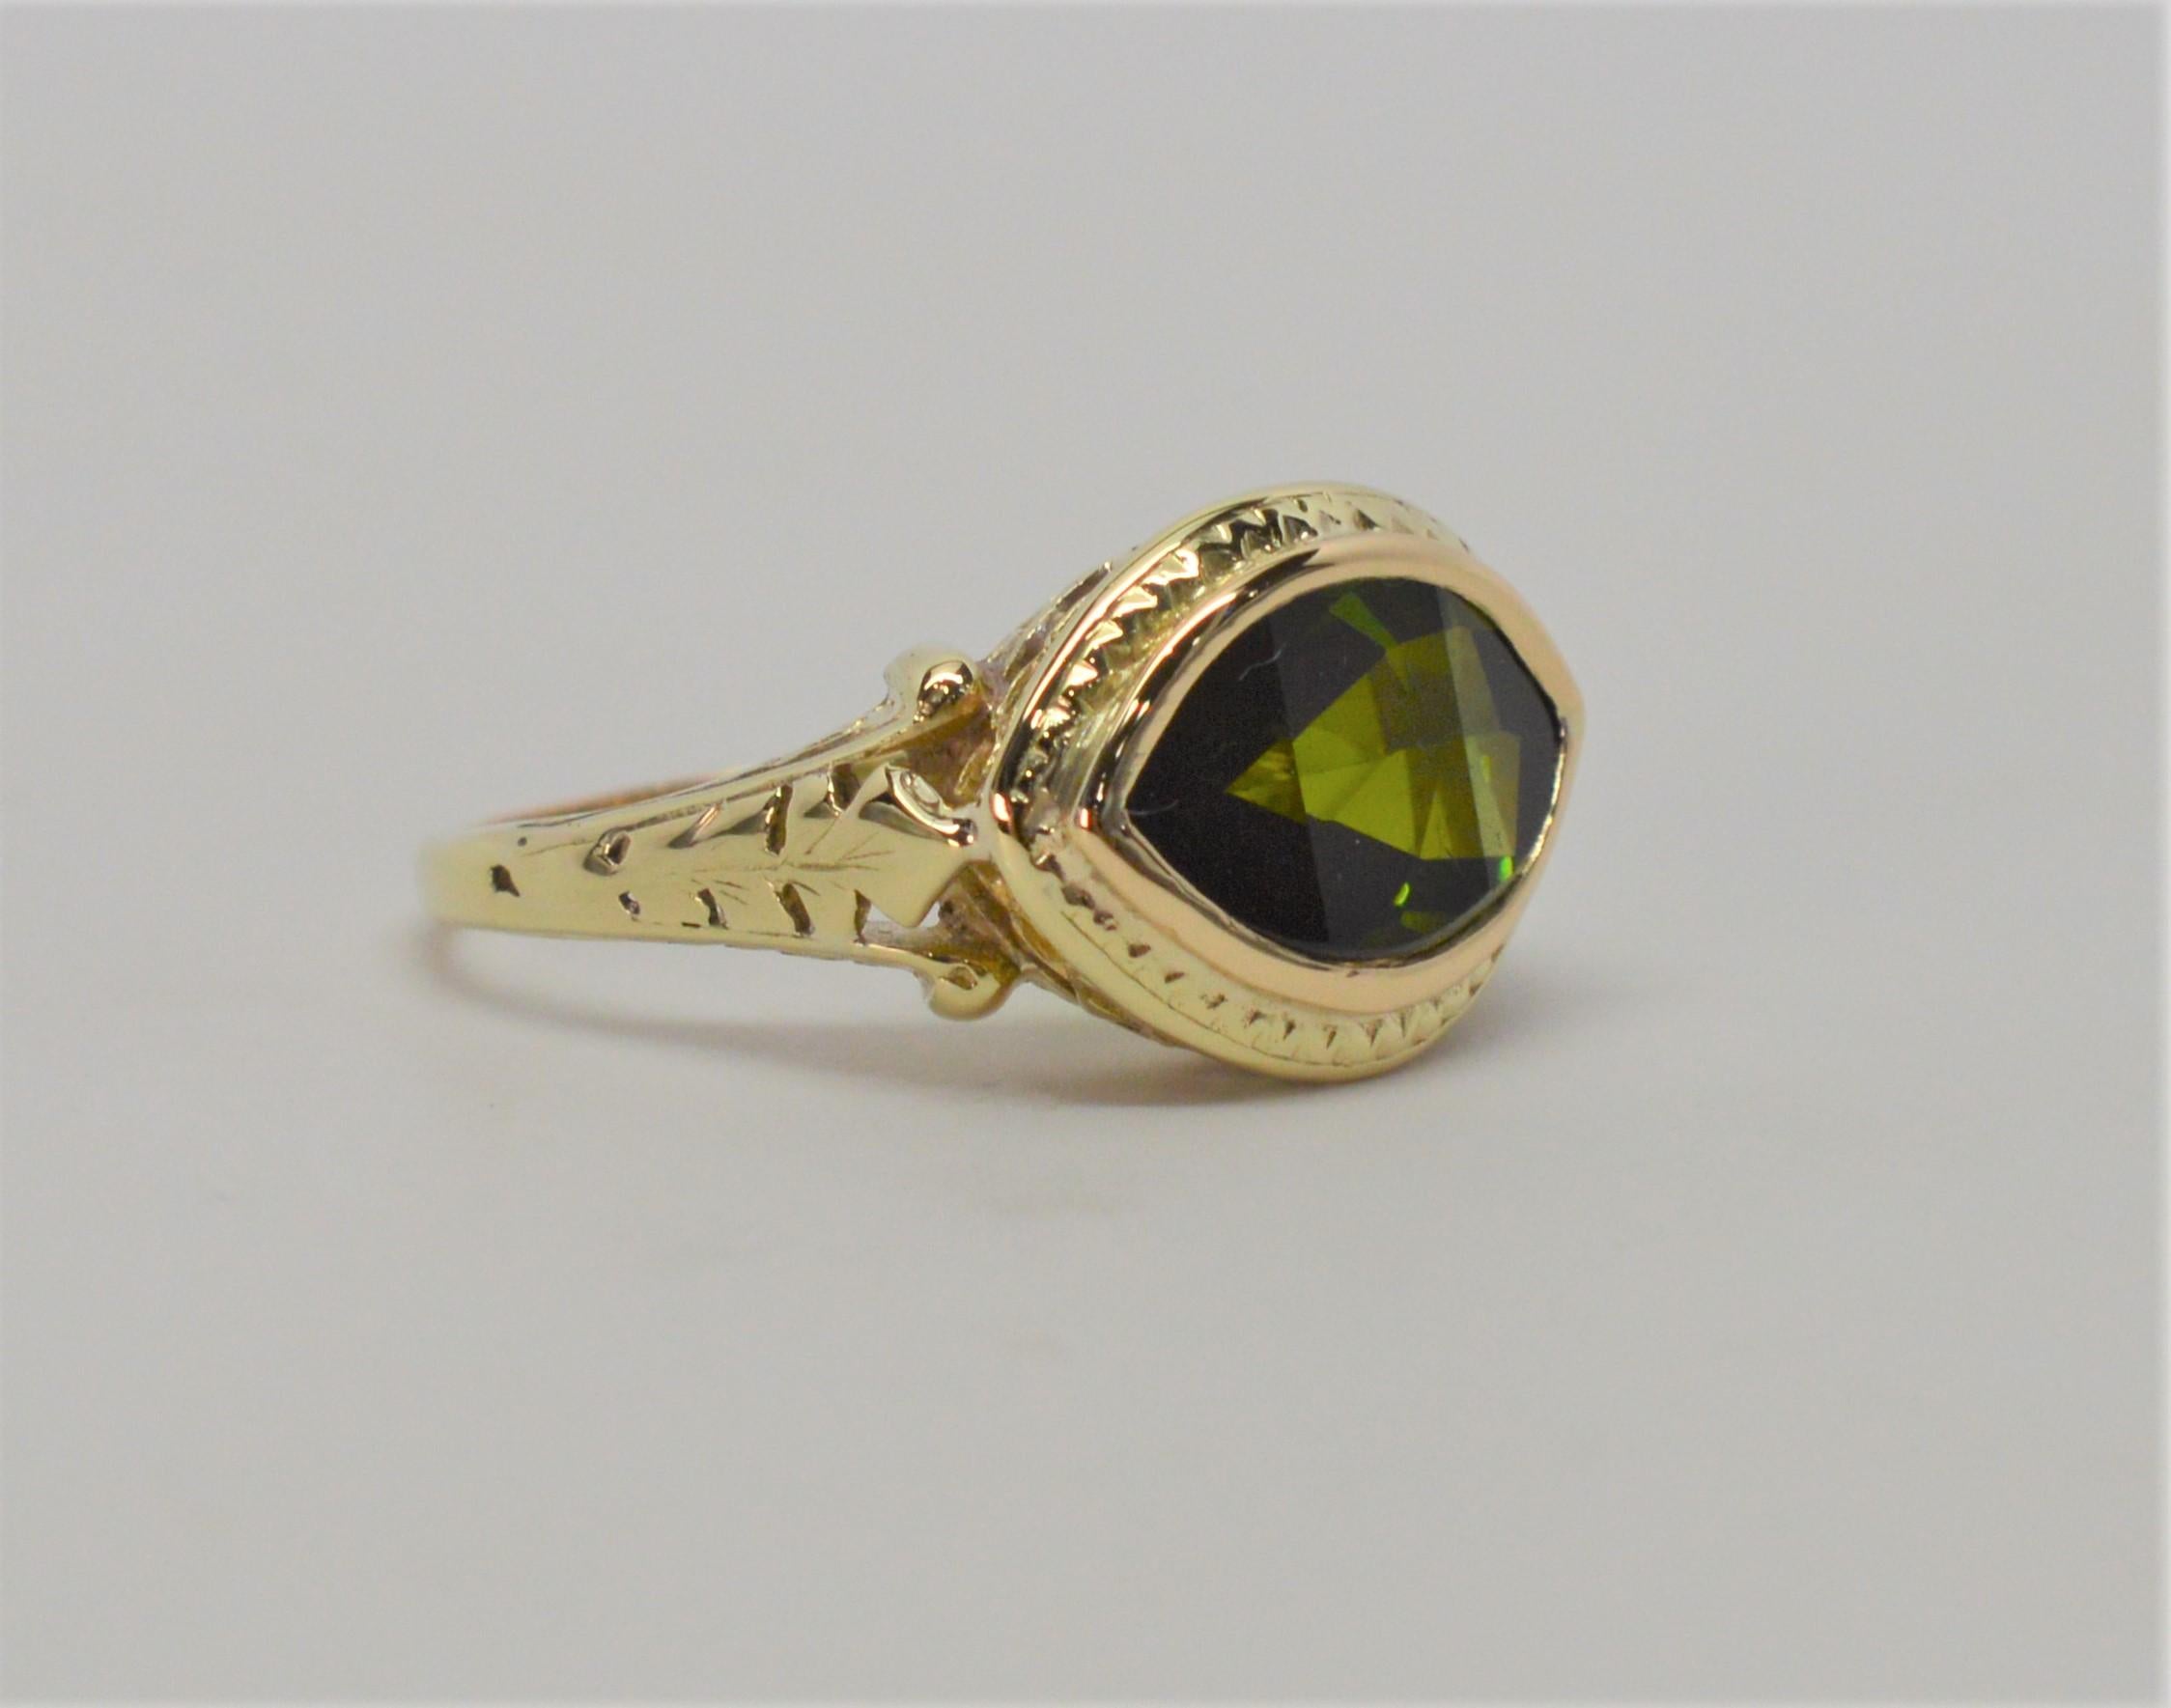 A fine tourmaline gemstone sits pretty in this antique 14 karat yellow gold ring setting. In size 6, with a natural 2.5 carat vibrant green tourmaline
faucet-cut marquise gemstone. In gift box.